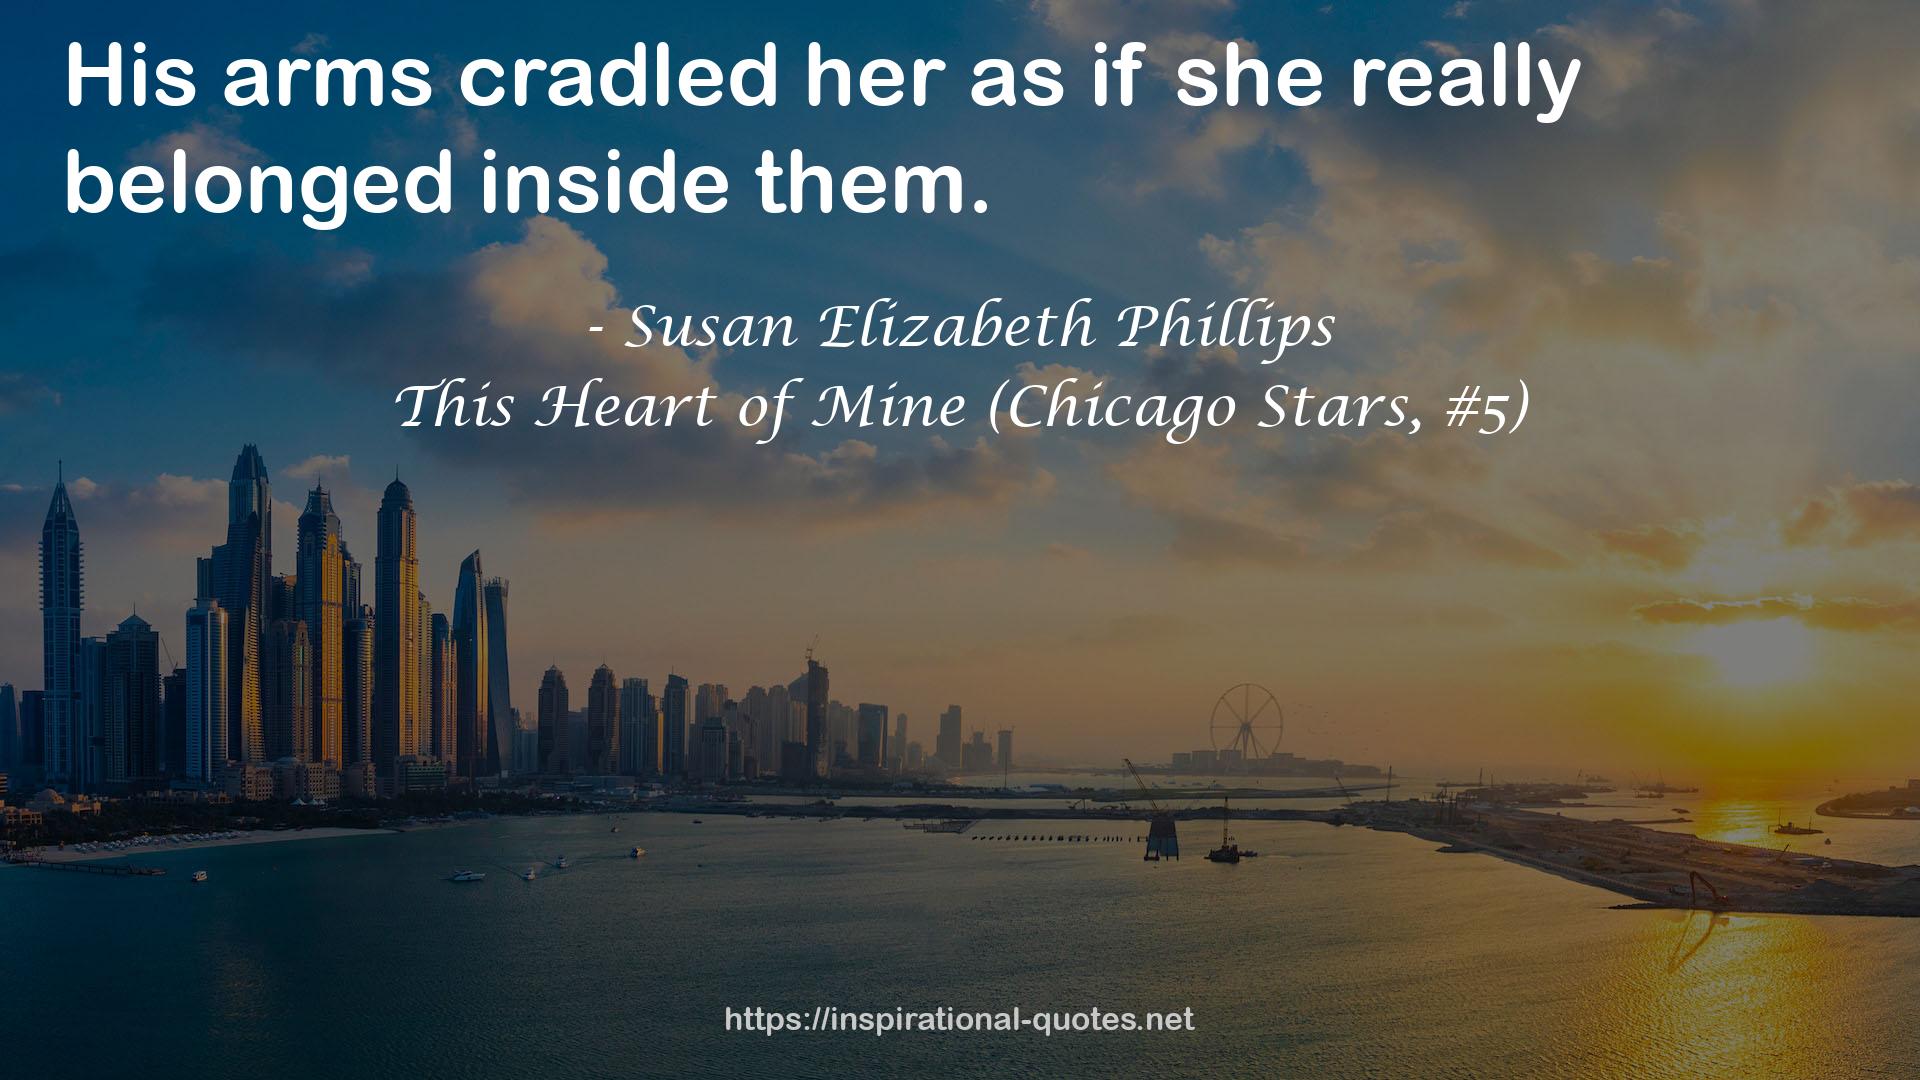 This Heart of Mine (Chicago Stars, #5) QUOTES